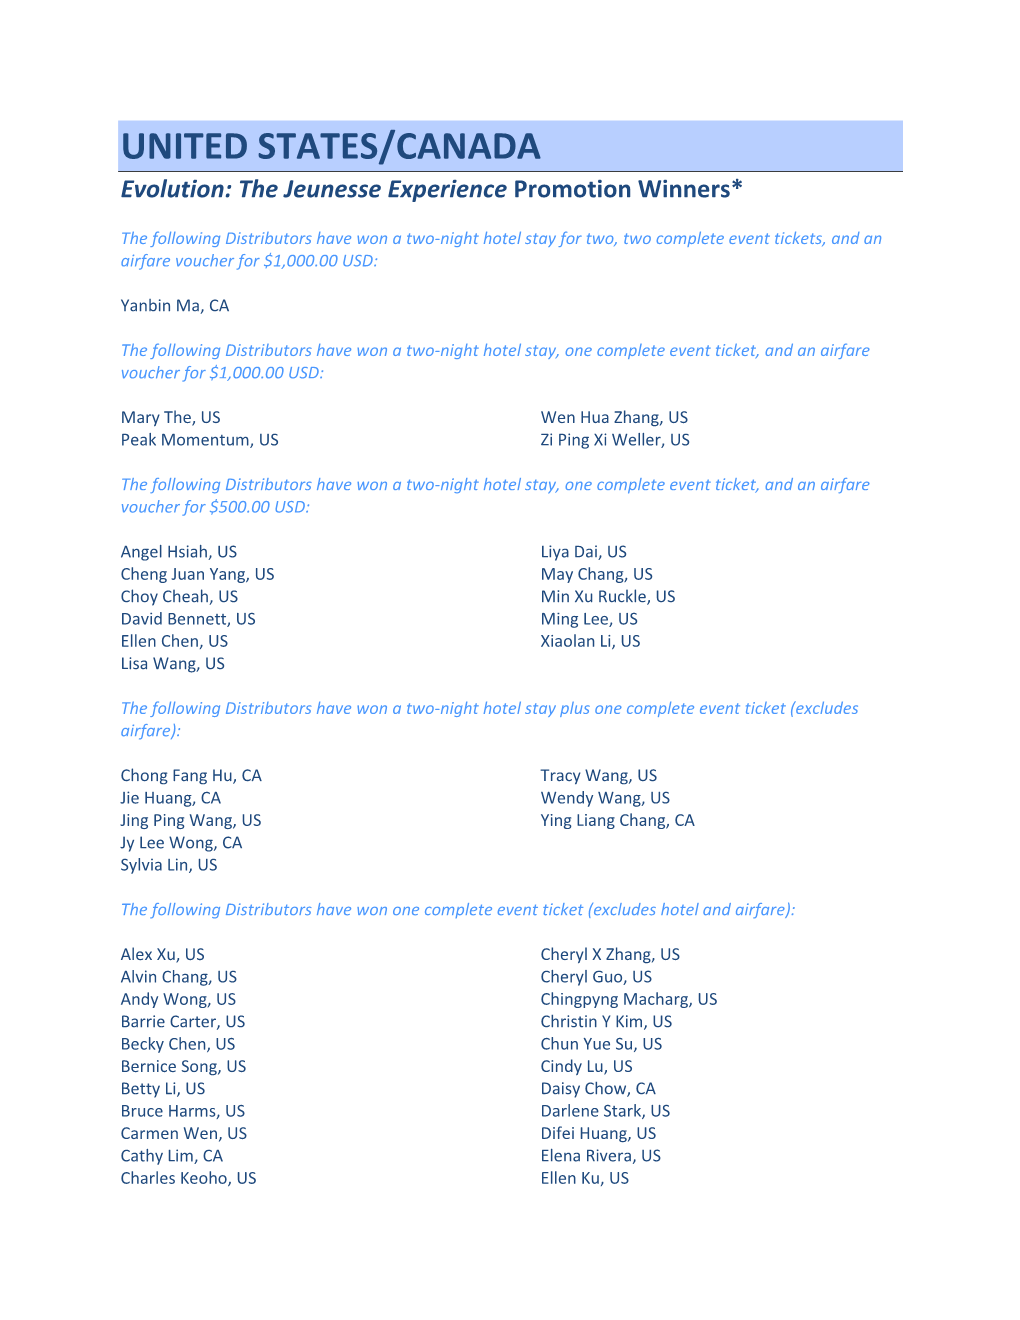 UNITED STATES/CANADA Evolution: the Jeunesse Experience Promotion Winners*